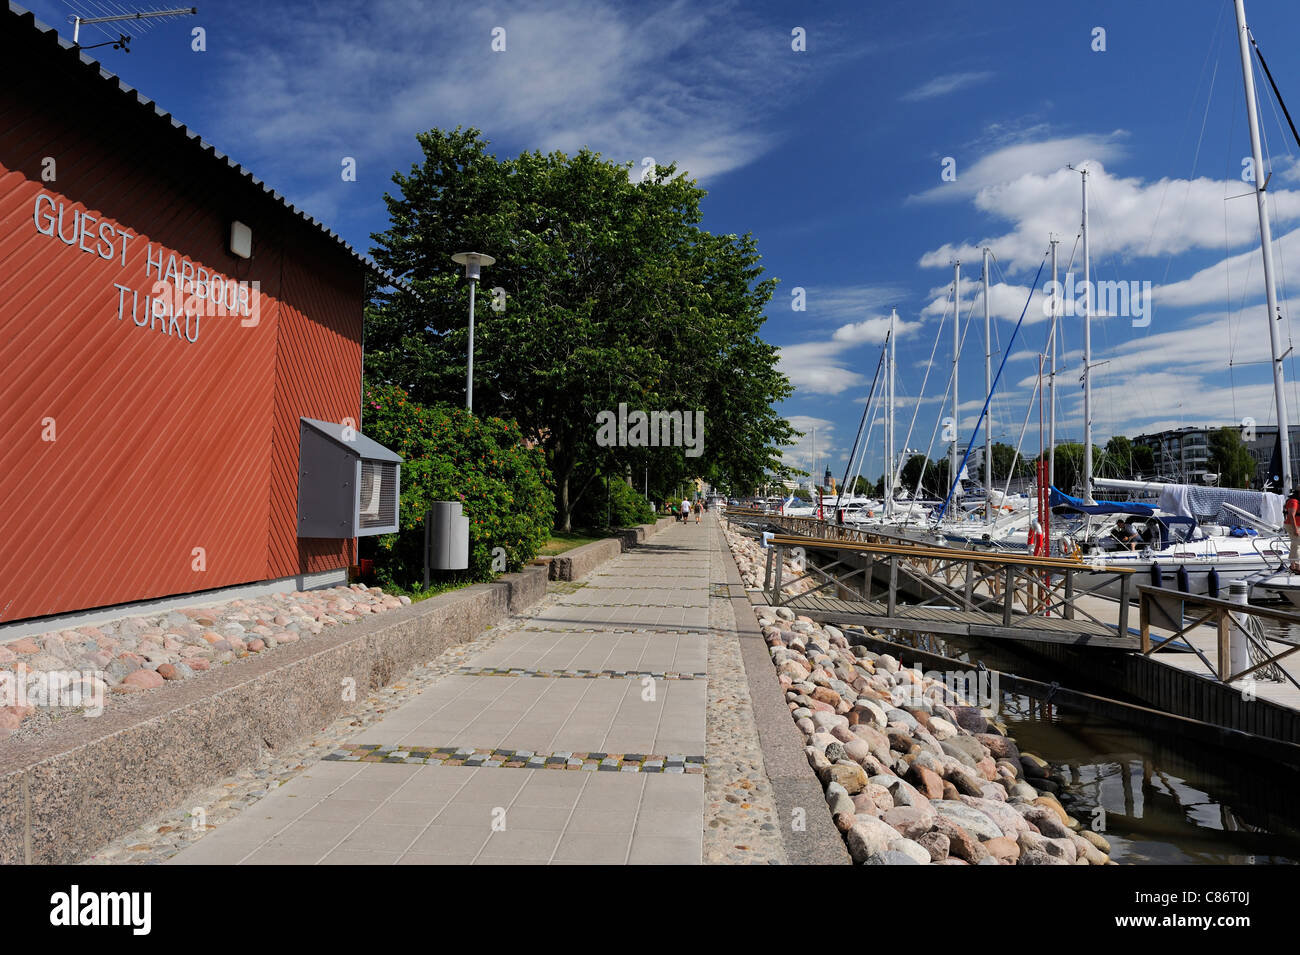 Guest Harbour of Turku town on Aurajoki river. Gueast Harbour is located in the center of Turku town, less that a kilometer from Stock Photo